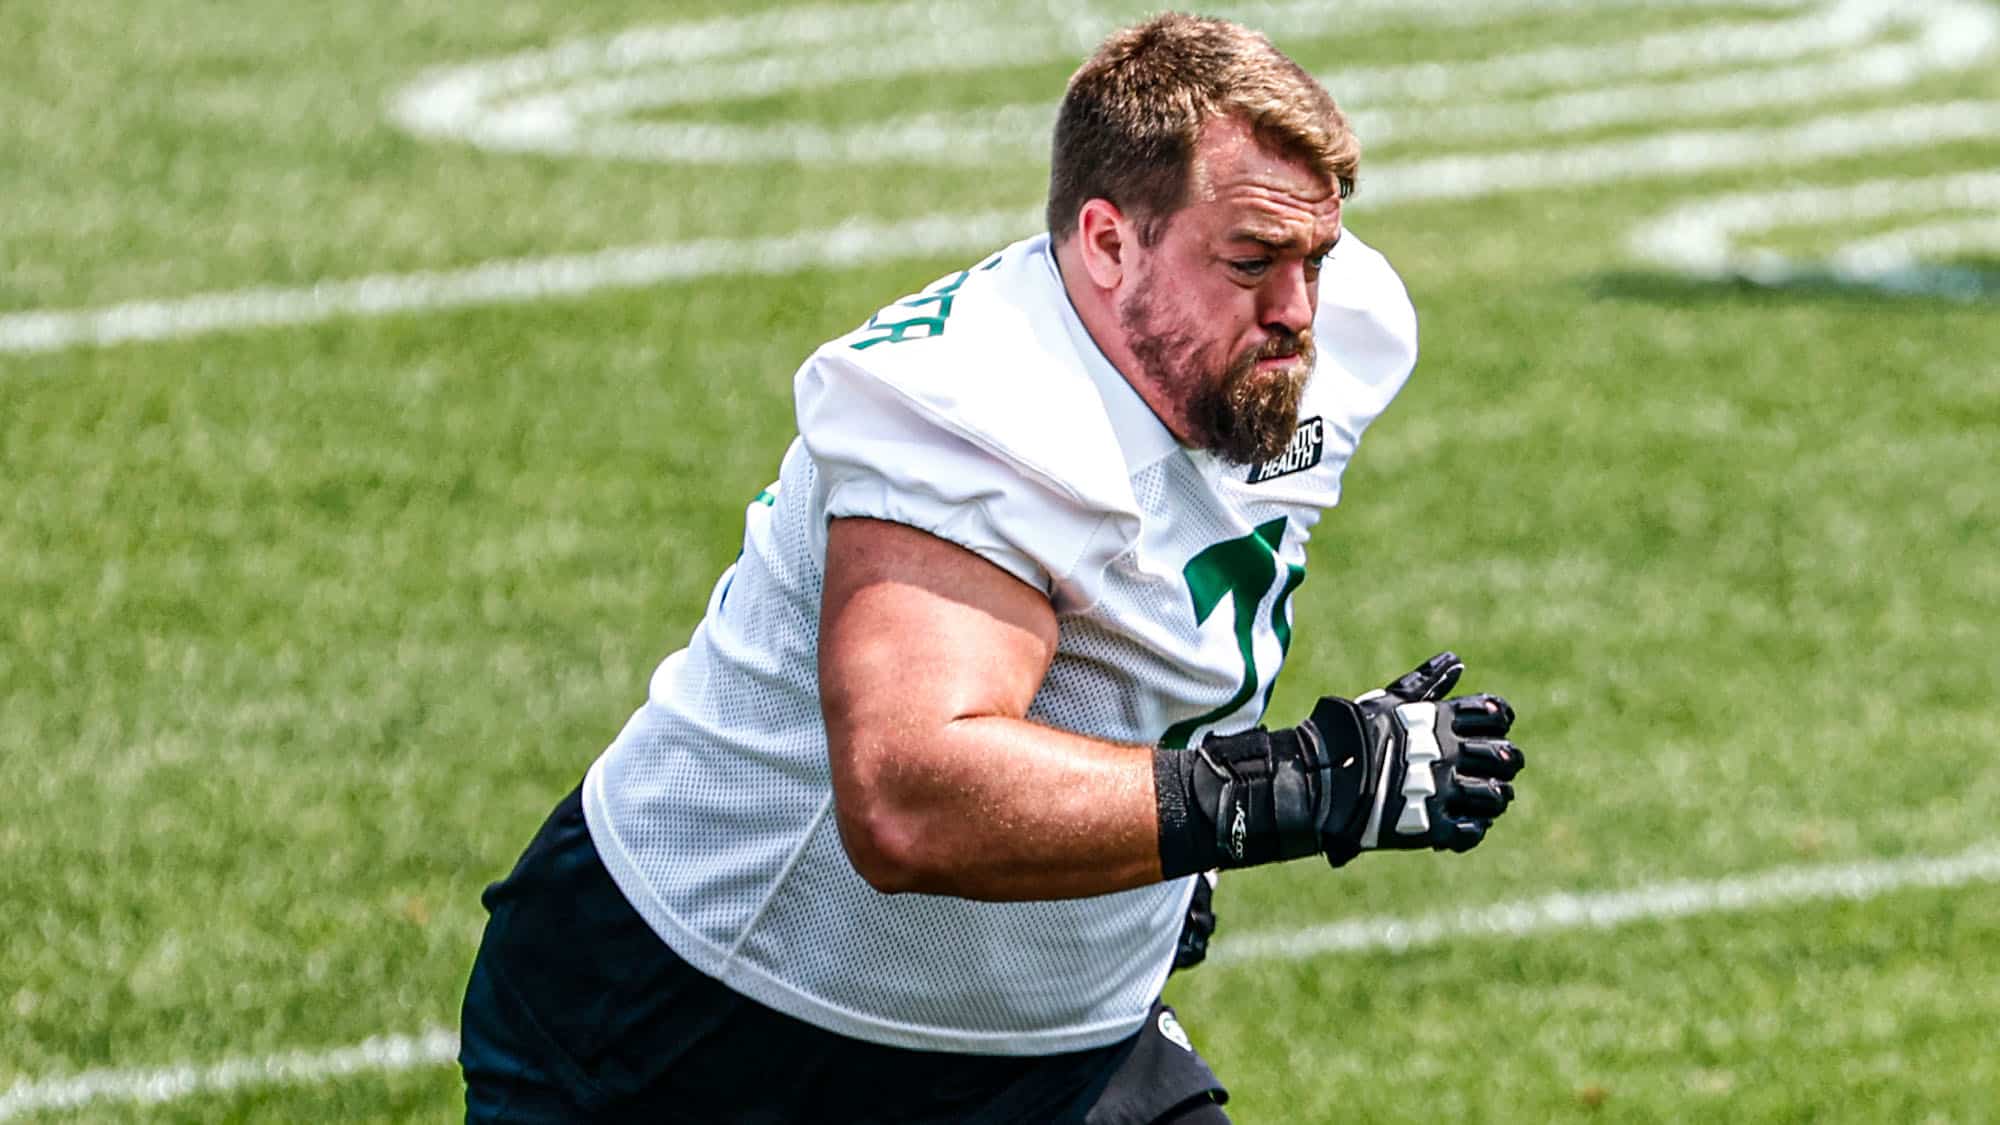 Wes Schweitzer, NY Jets, OL, Film, Contract